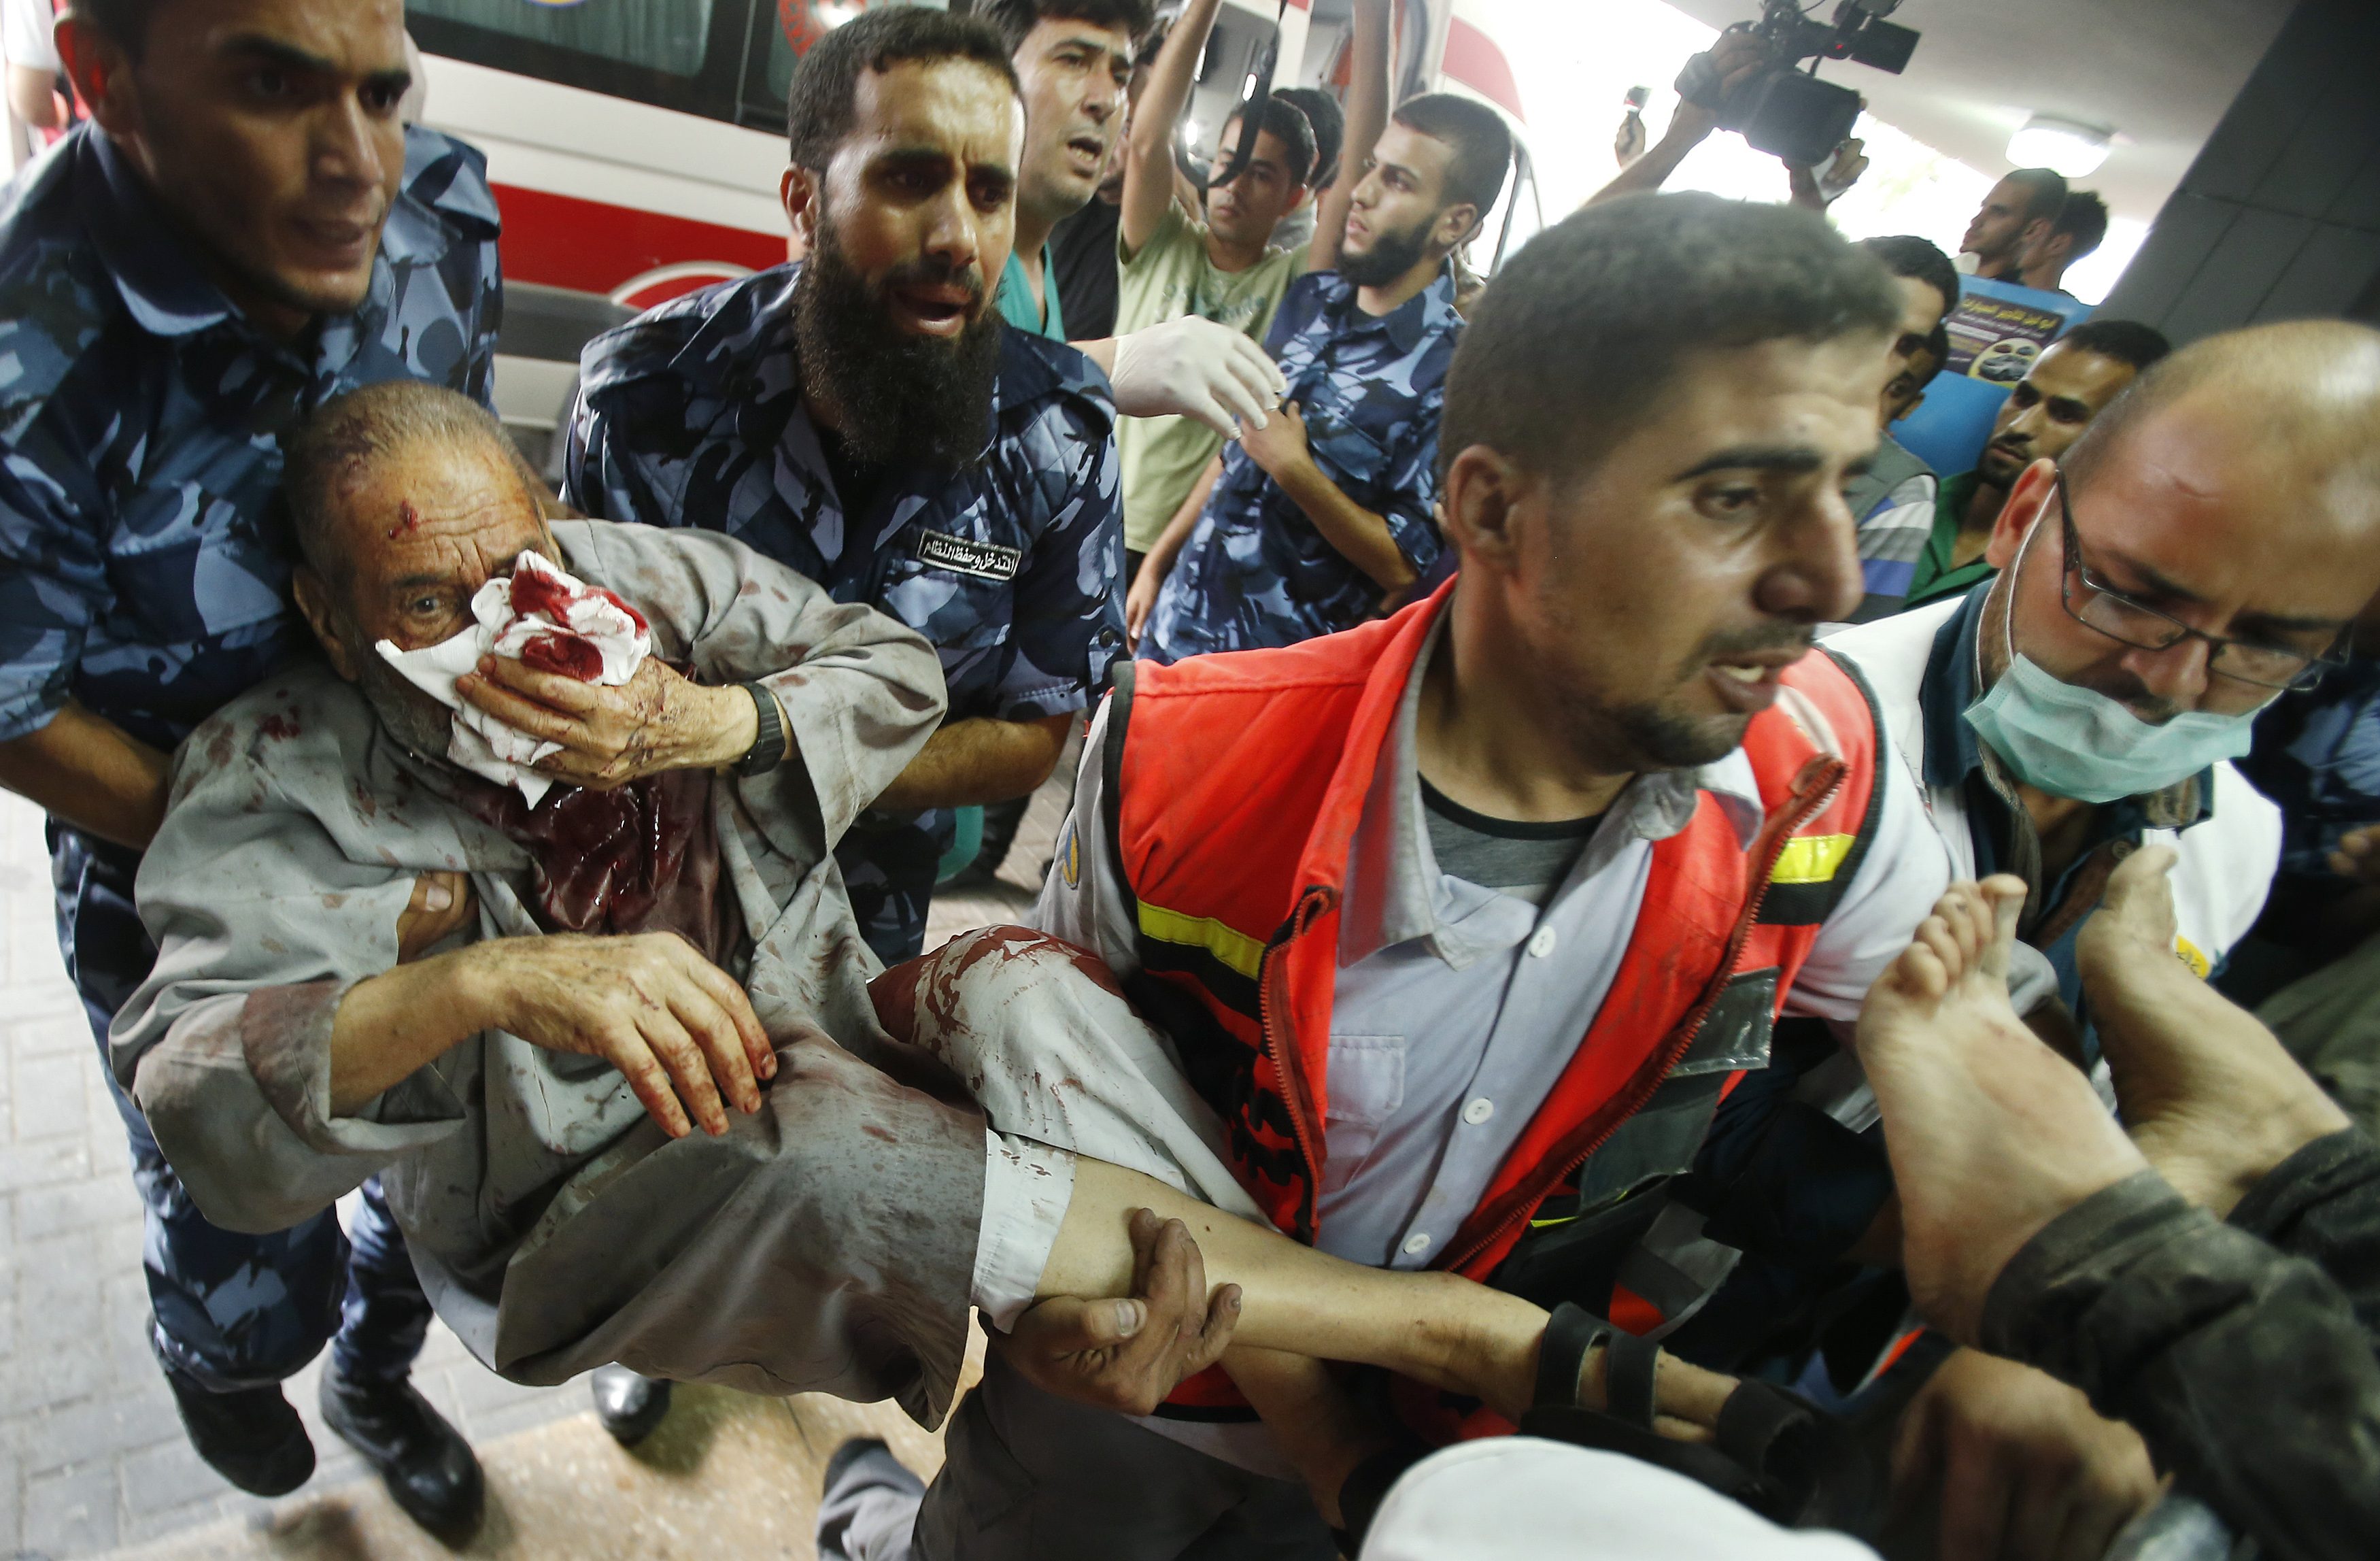 Palestinian policemen and medics carry a man, who medics said was wounded in Israeli shelling, at a hospital in Gaza City July 20, 2014.